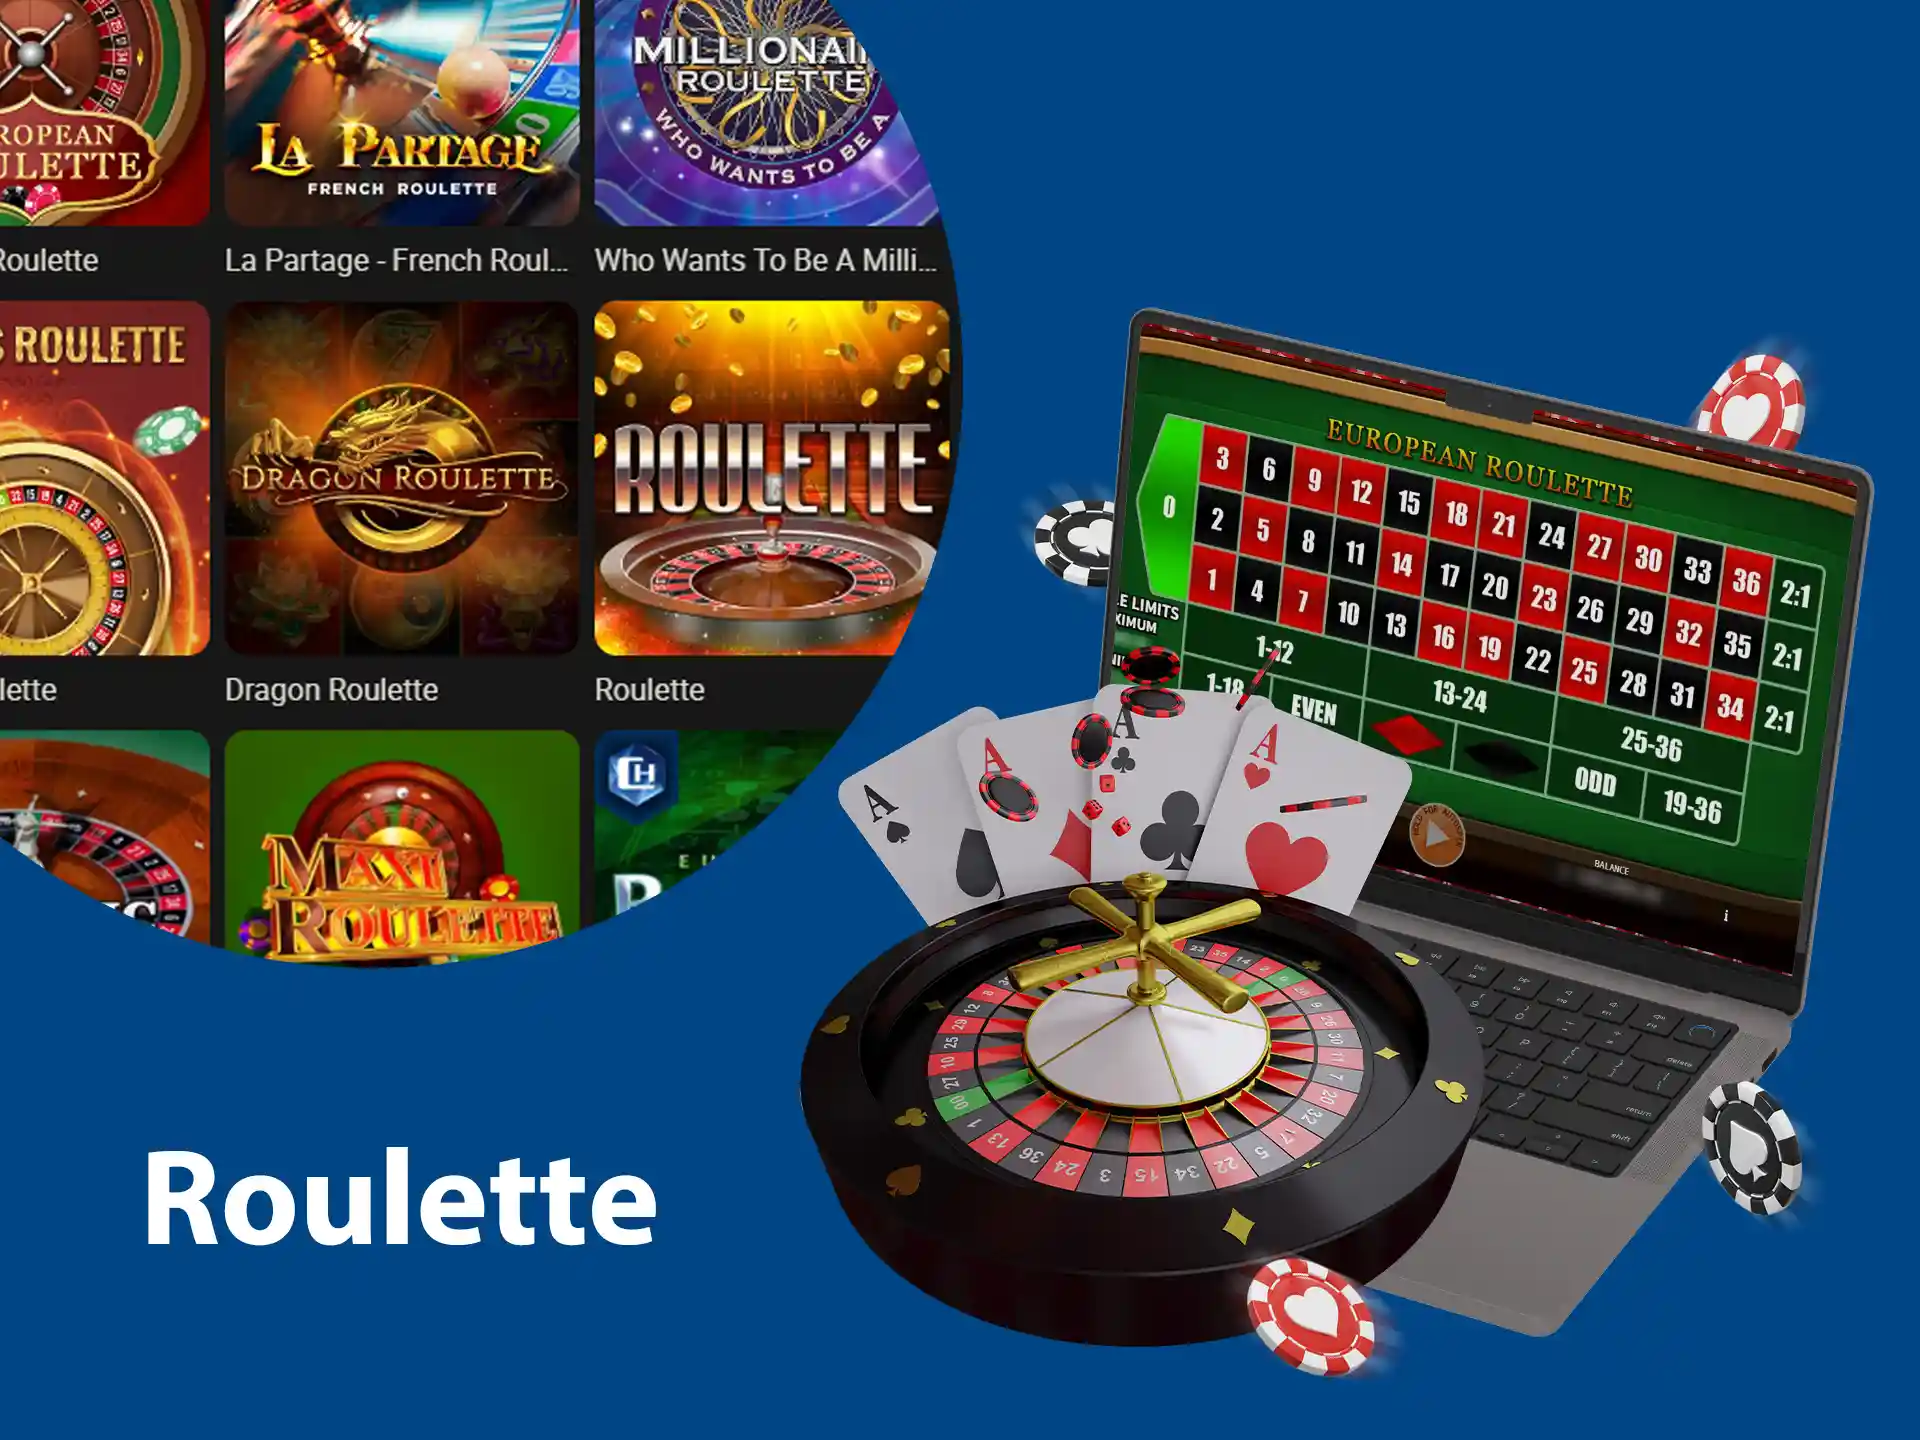 Play French, American, European and other roulette games online at casinos.